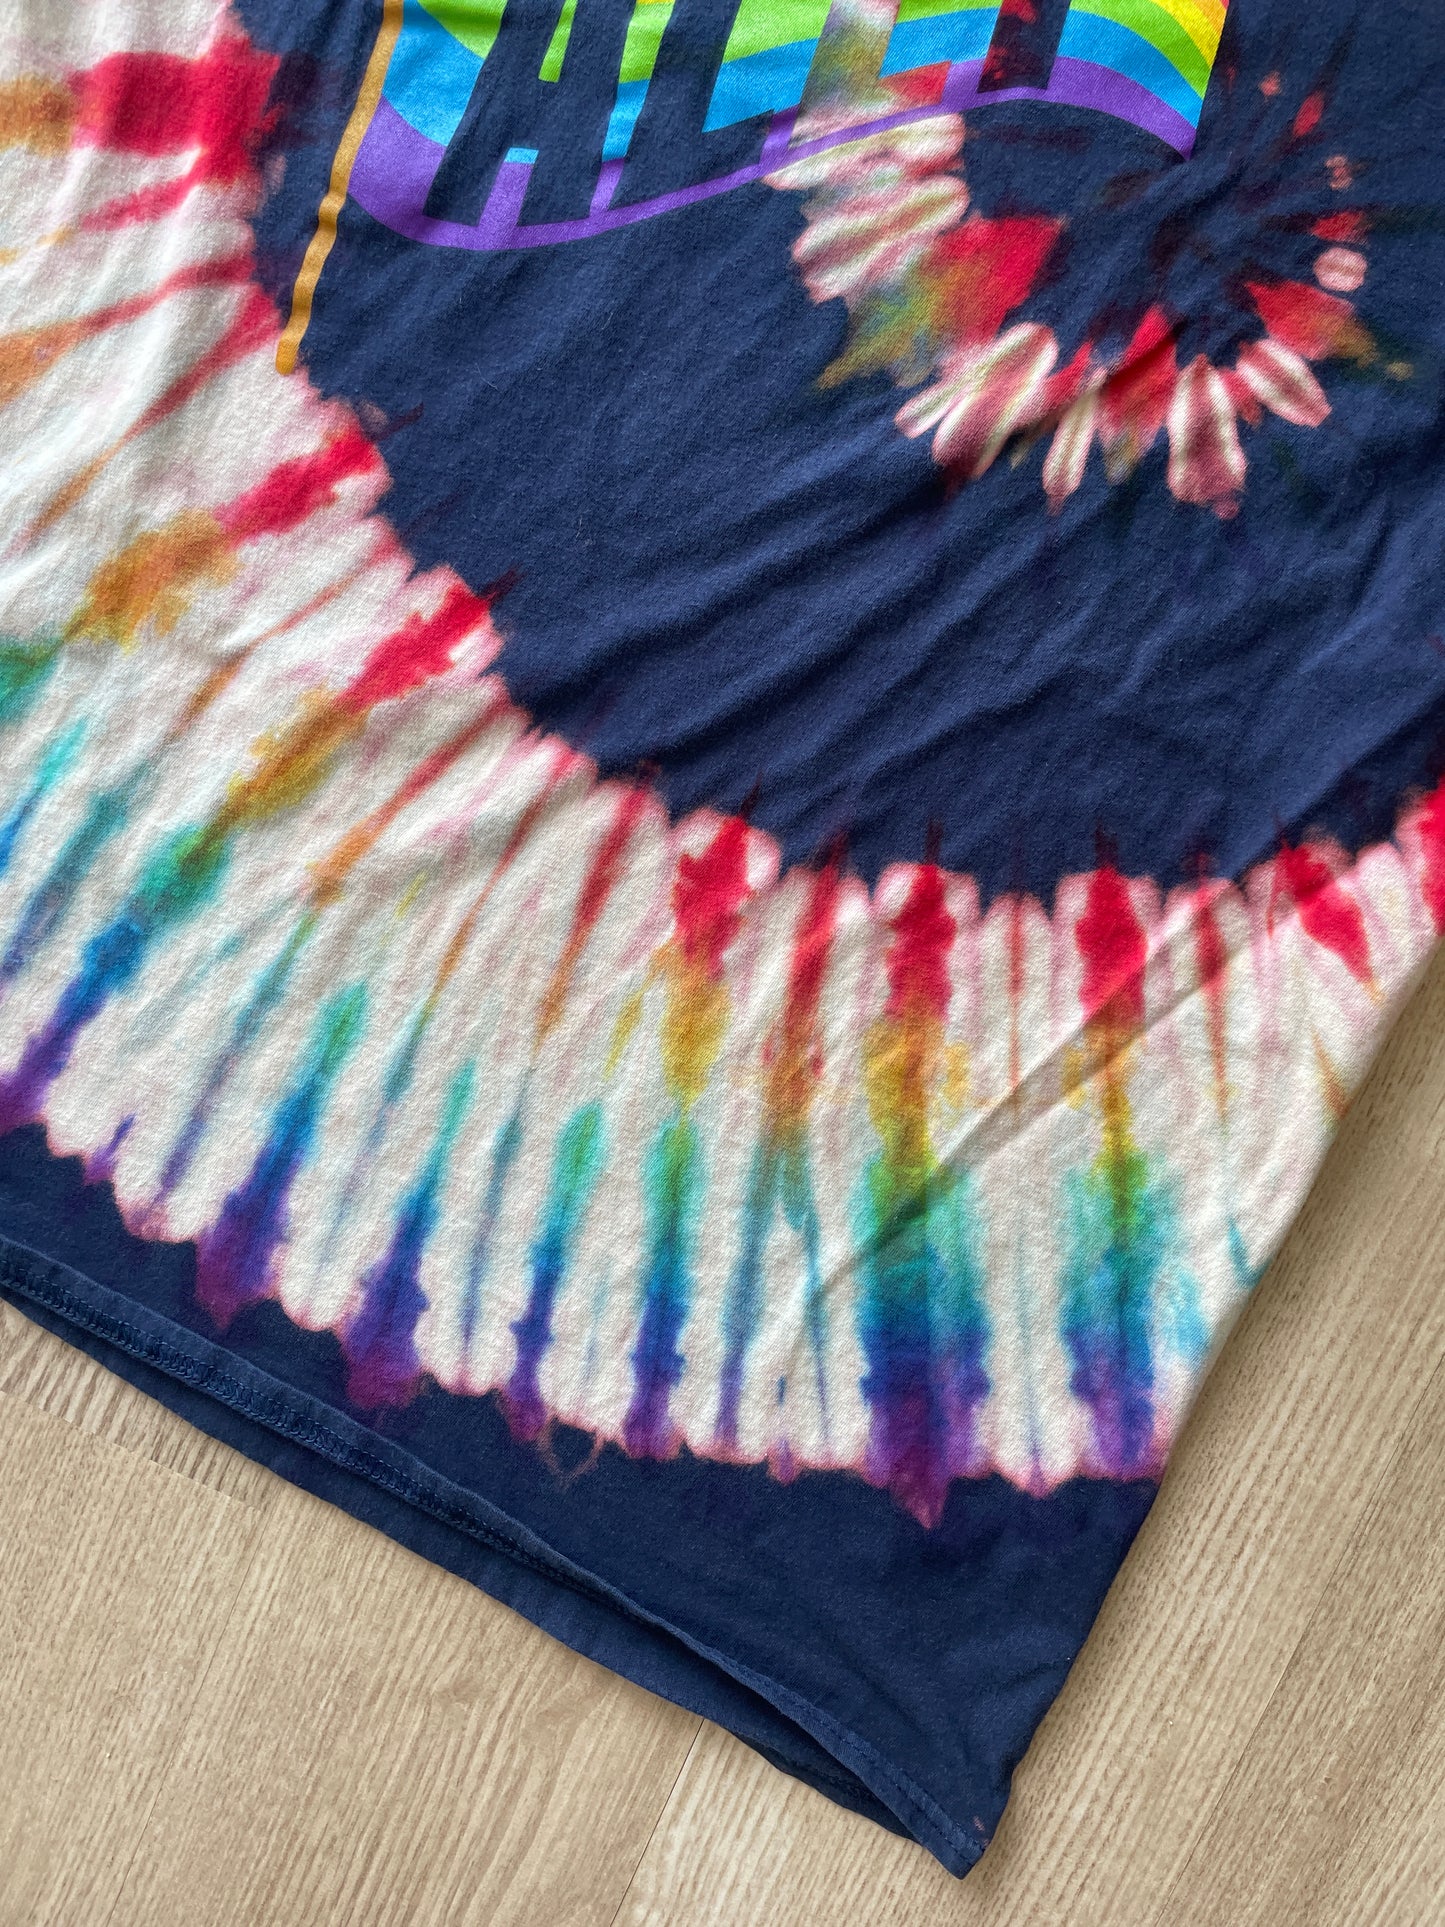 LARGE Women's LGBQ+ Pride Flag ALLY Handmade Reverse Tie Dye T-Shirt | One-Of-a-Kind Navy Blue and Rainbow Short Sleeve